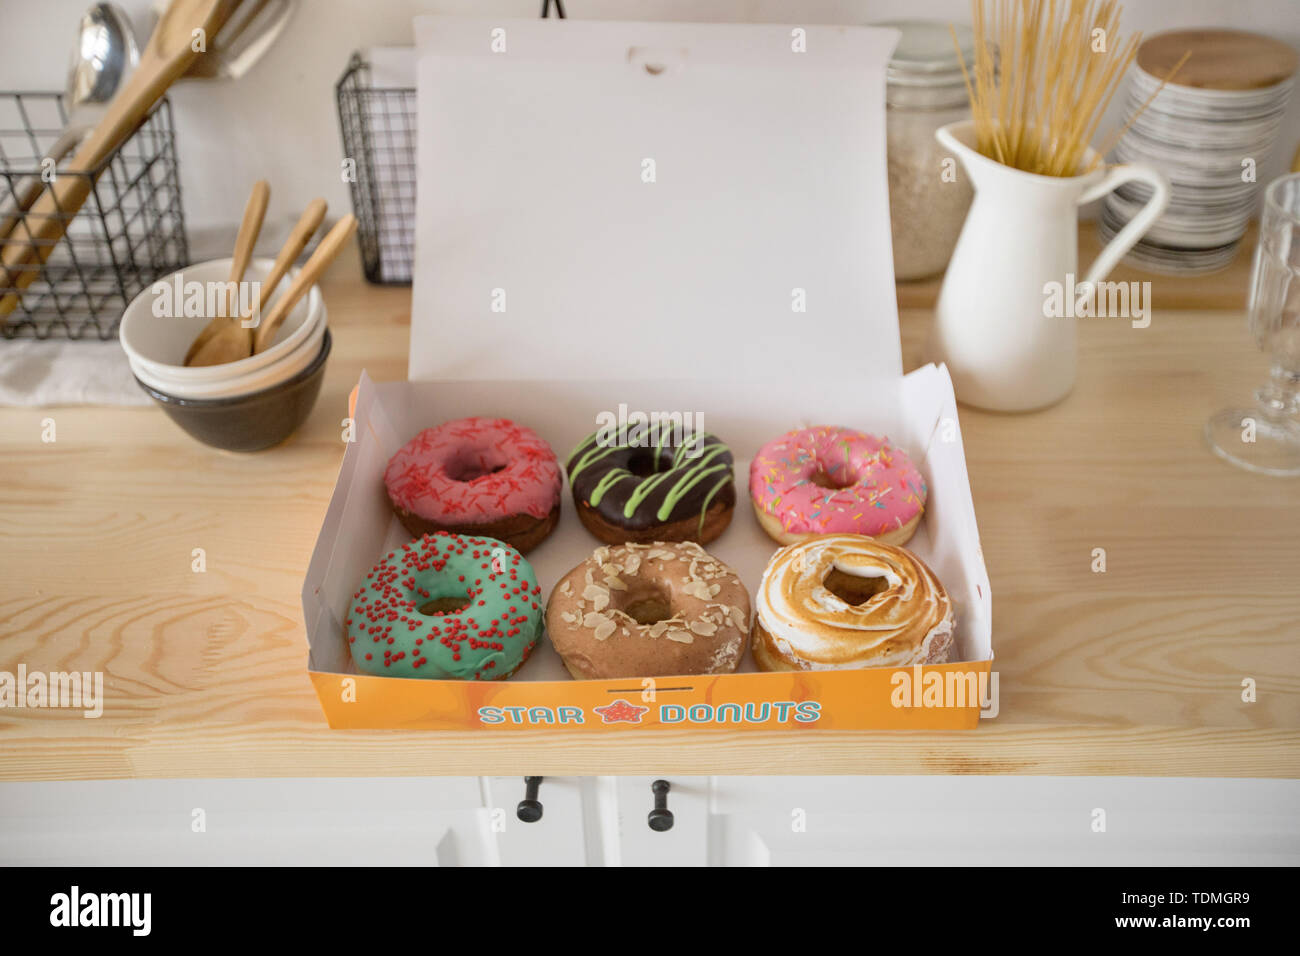 Box with doughnuts on table Stock Photo